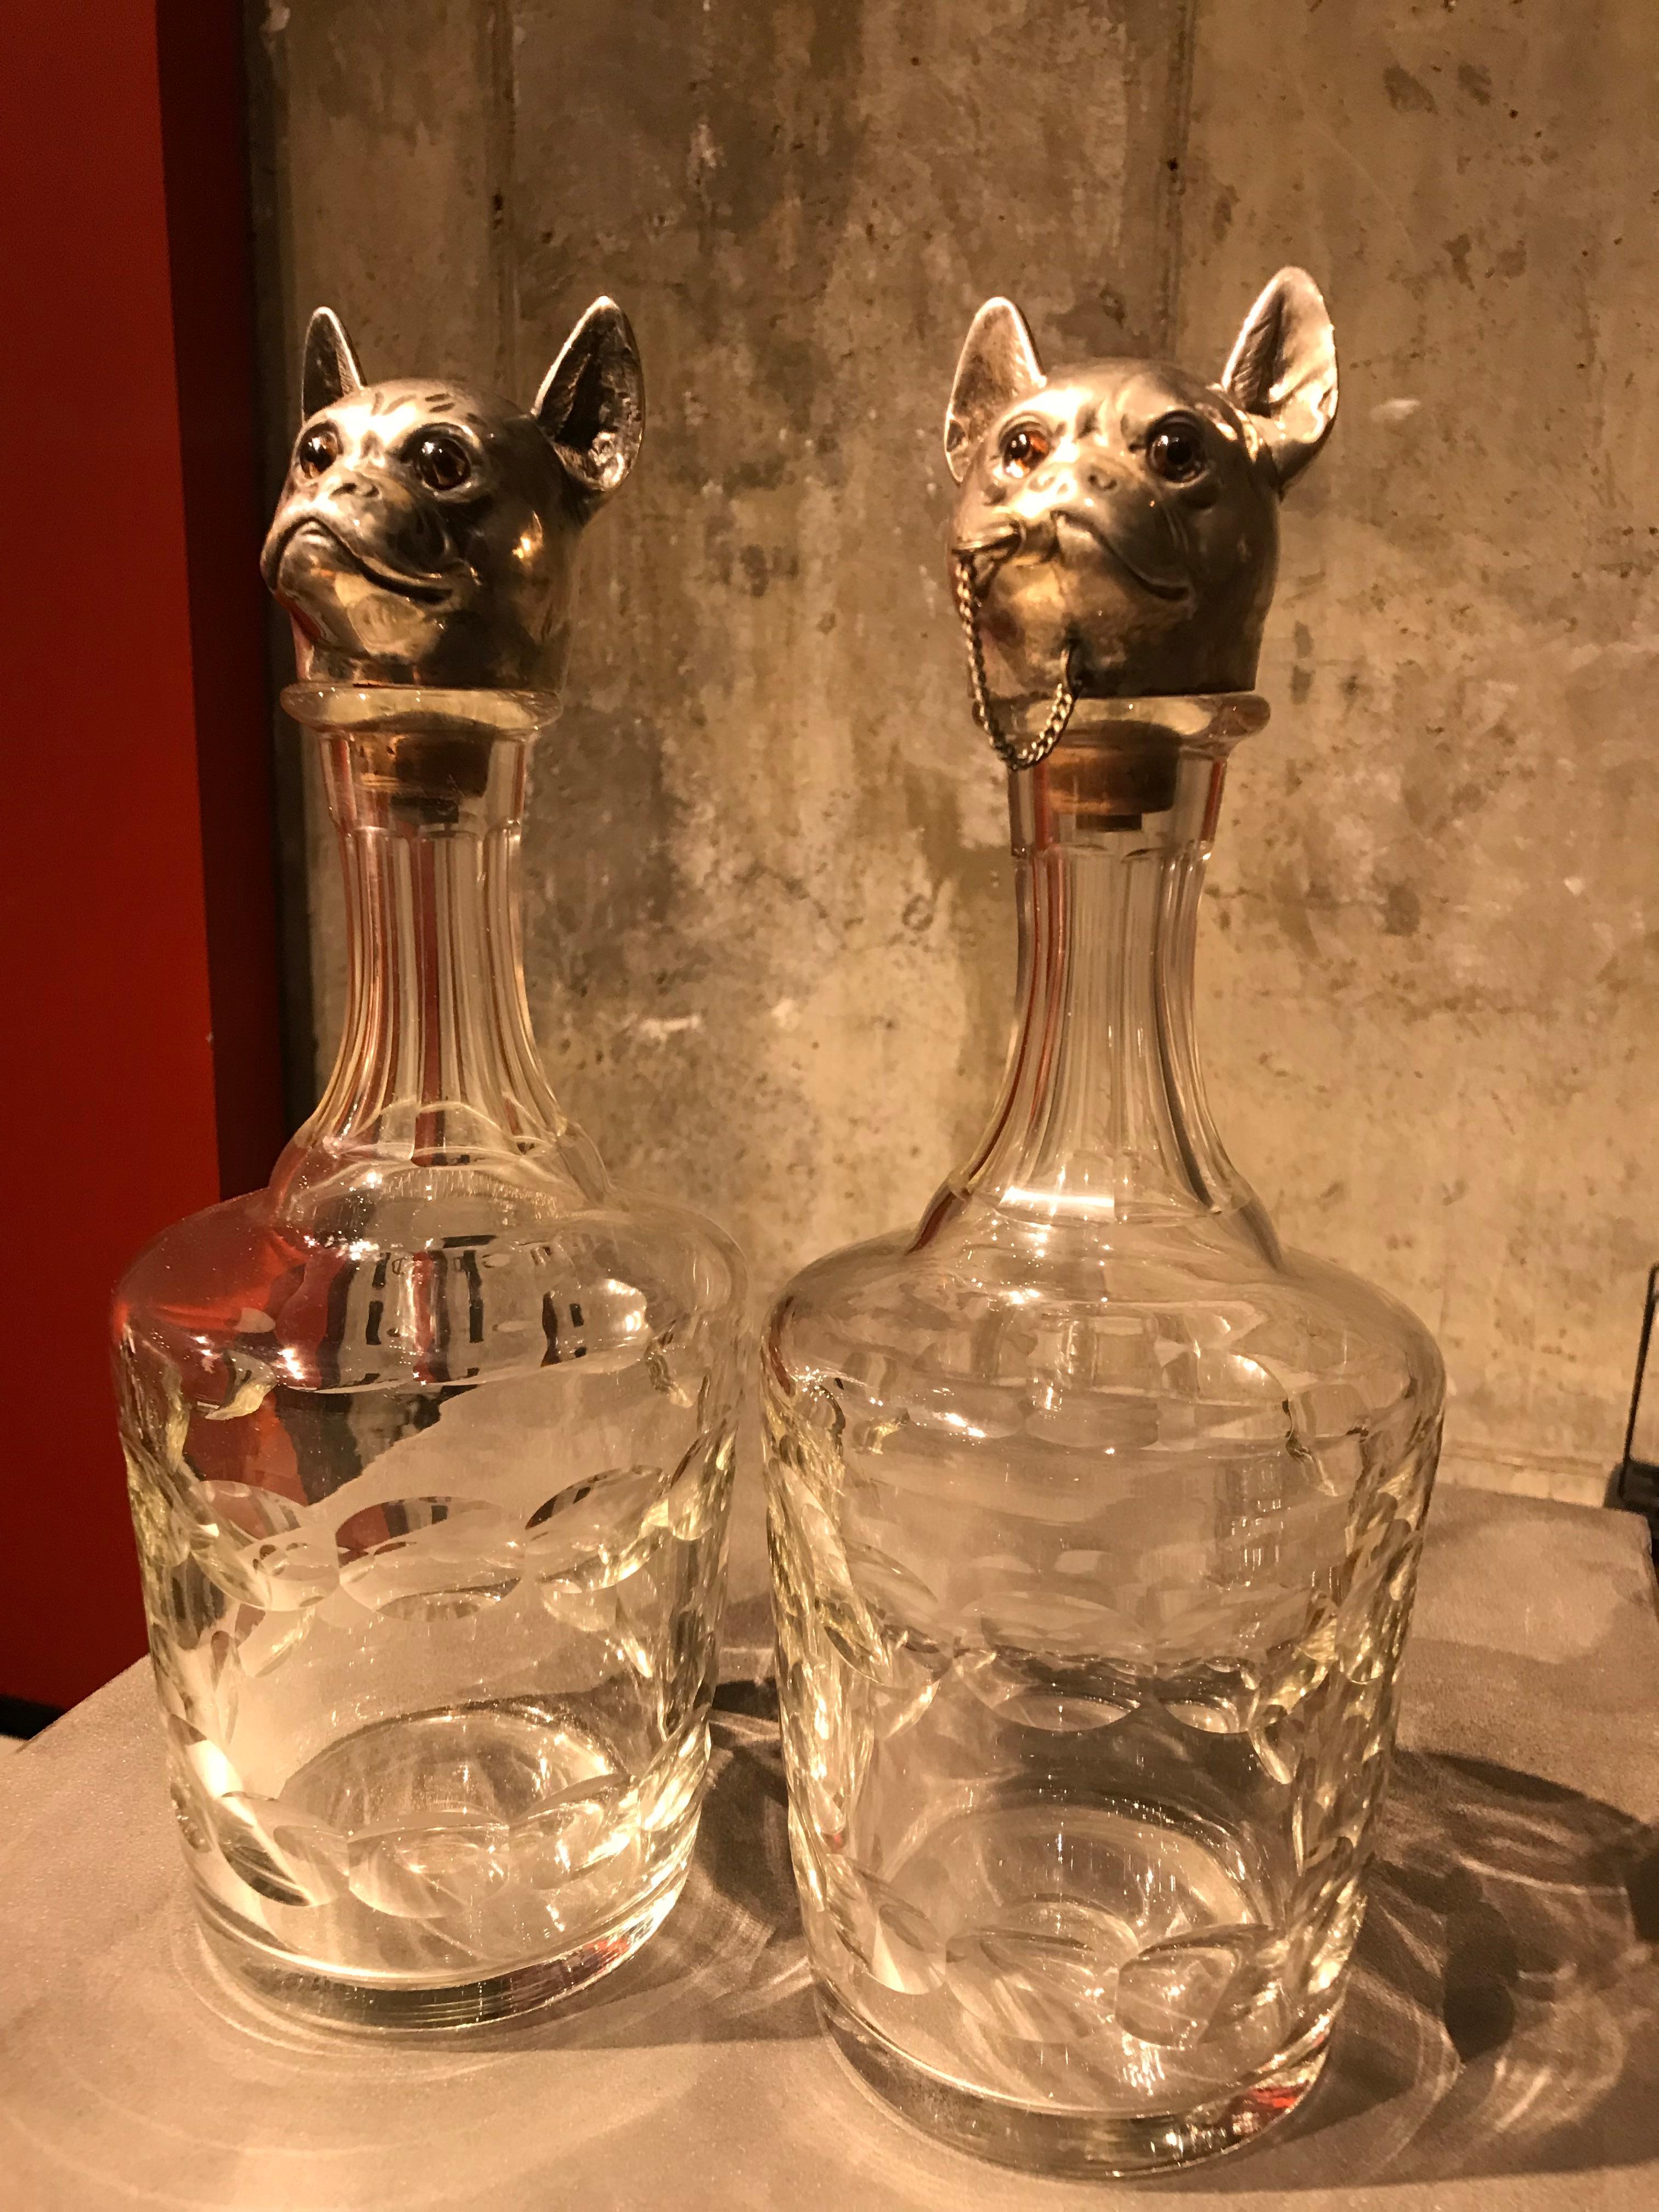 These Austrian decanters are in fantastic condition, and very rare to find a matching pair. Each dog head retains it's original cut glass body and glass eyes.